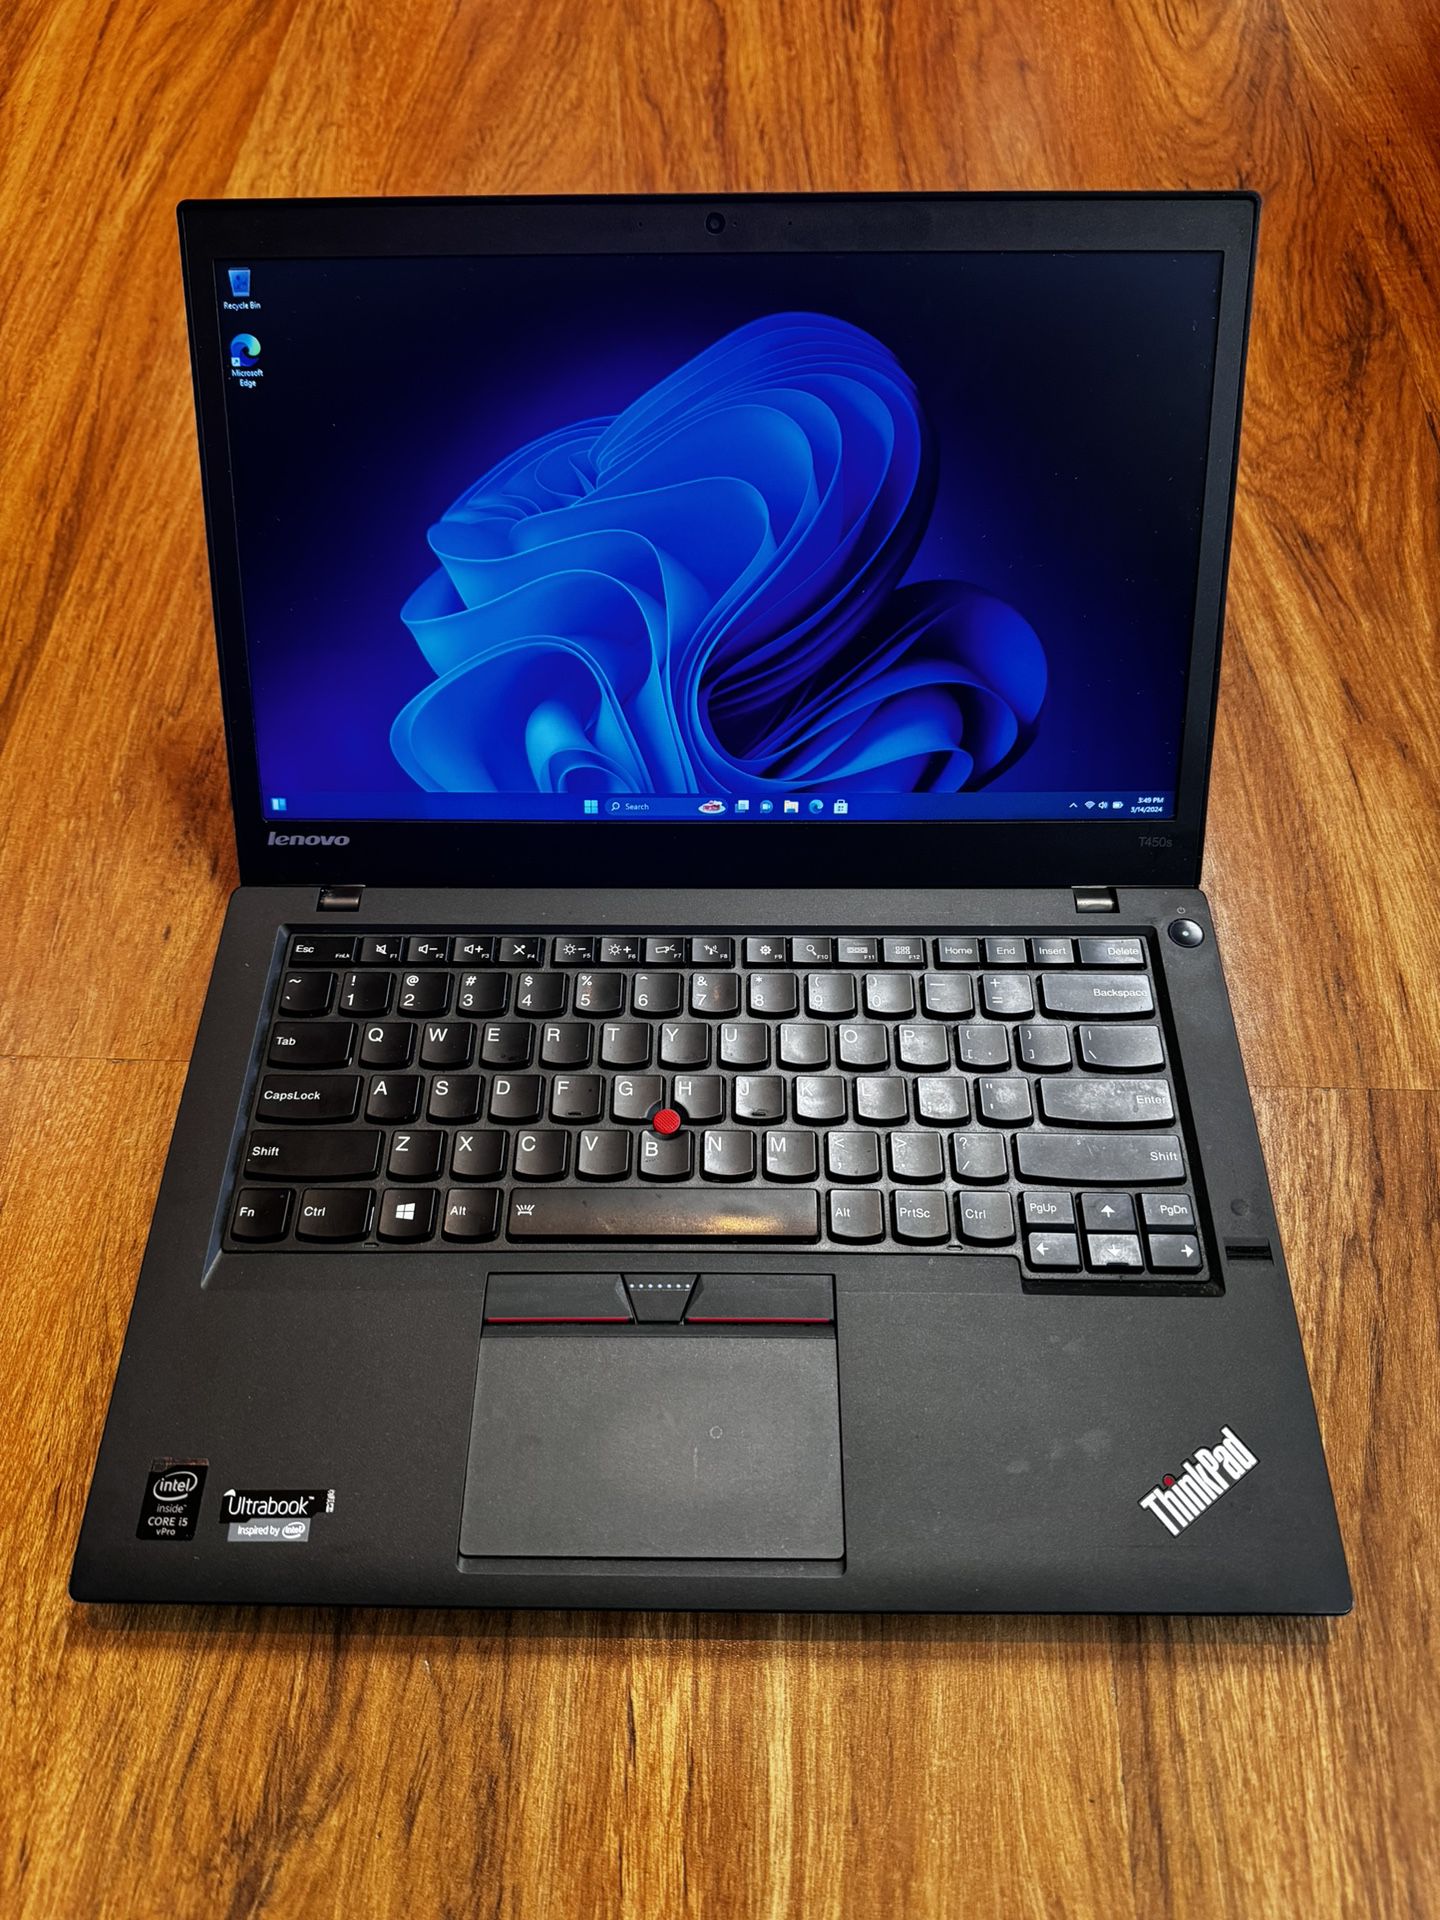 Lenovo ThinkPad T450s core i5 5th gen 8GB Ram 256GB SSD Windows 11 Pro 14.1” Screen Laptop with charger in Excellent Working condition!!!!!  Specifica